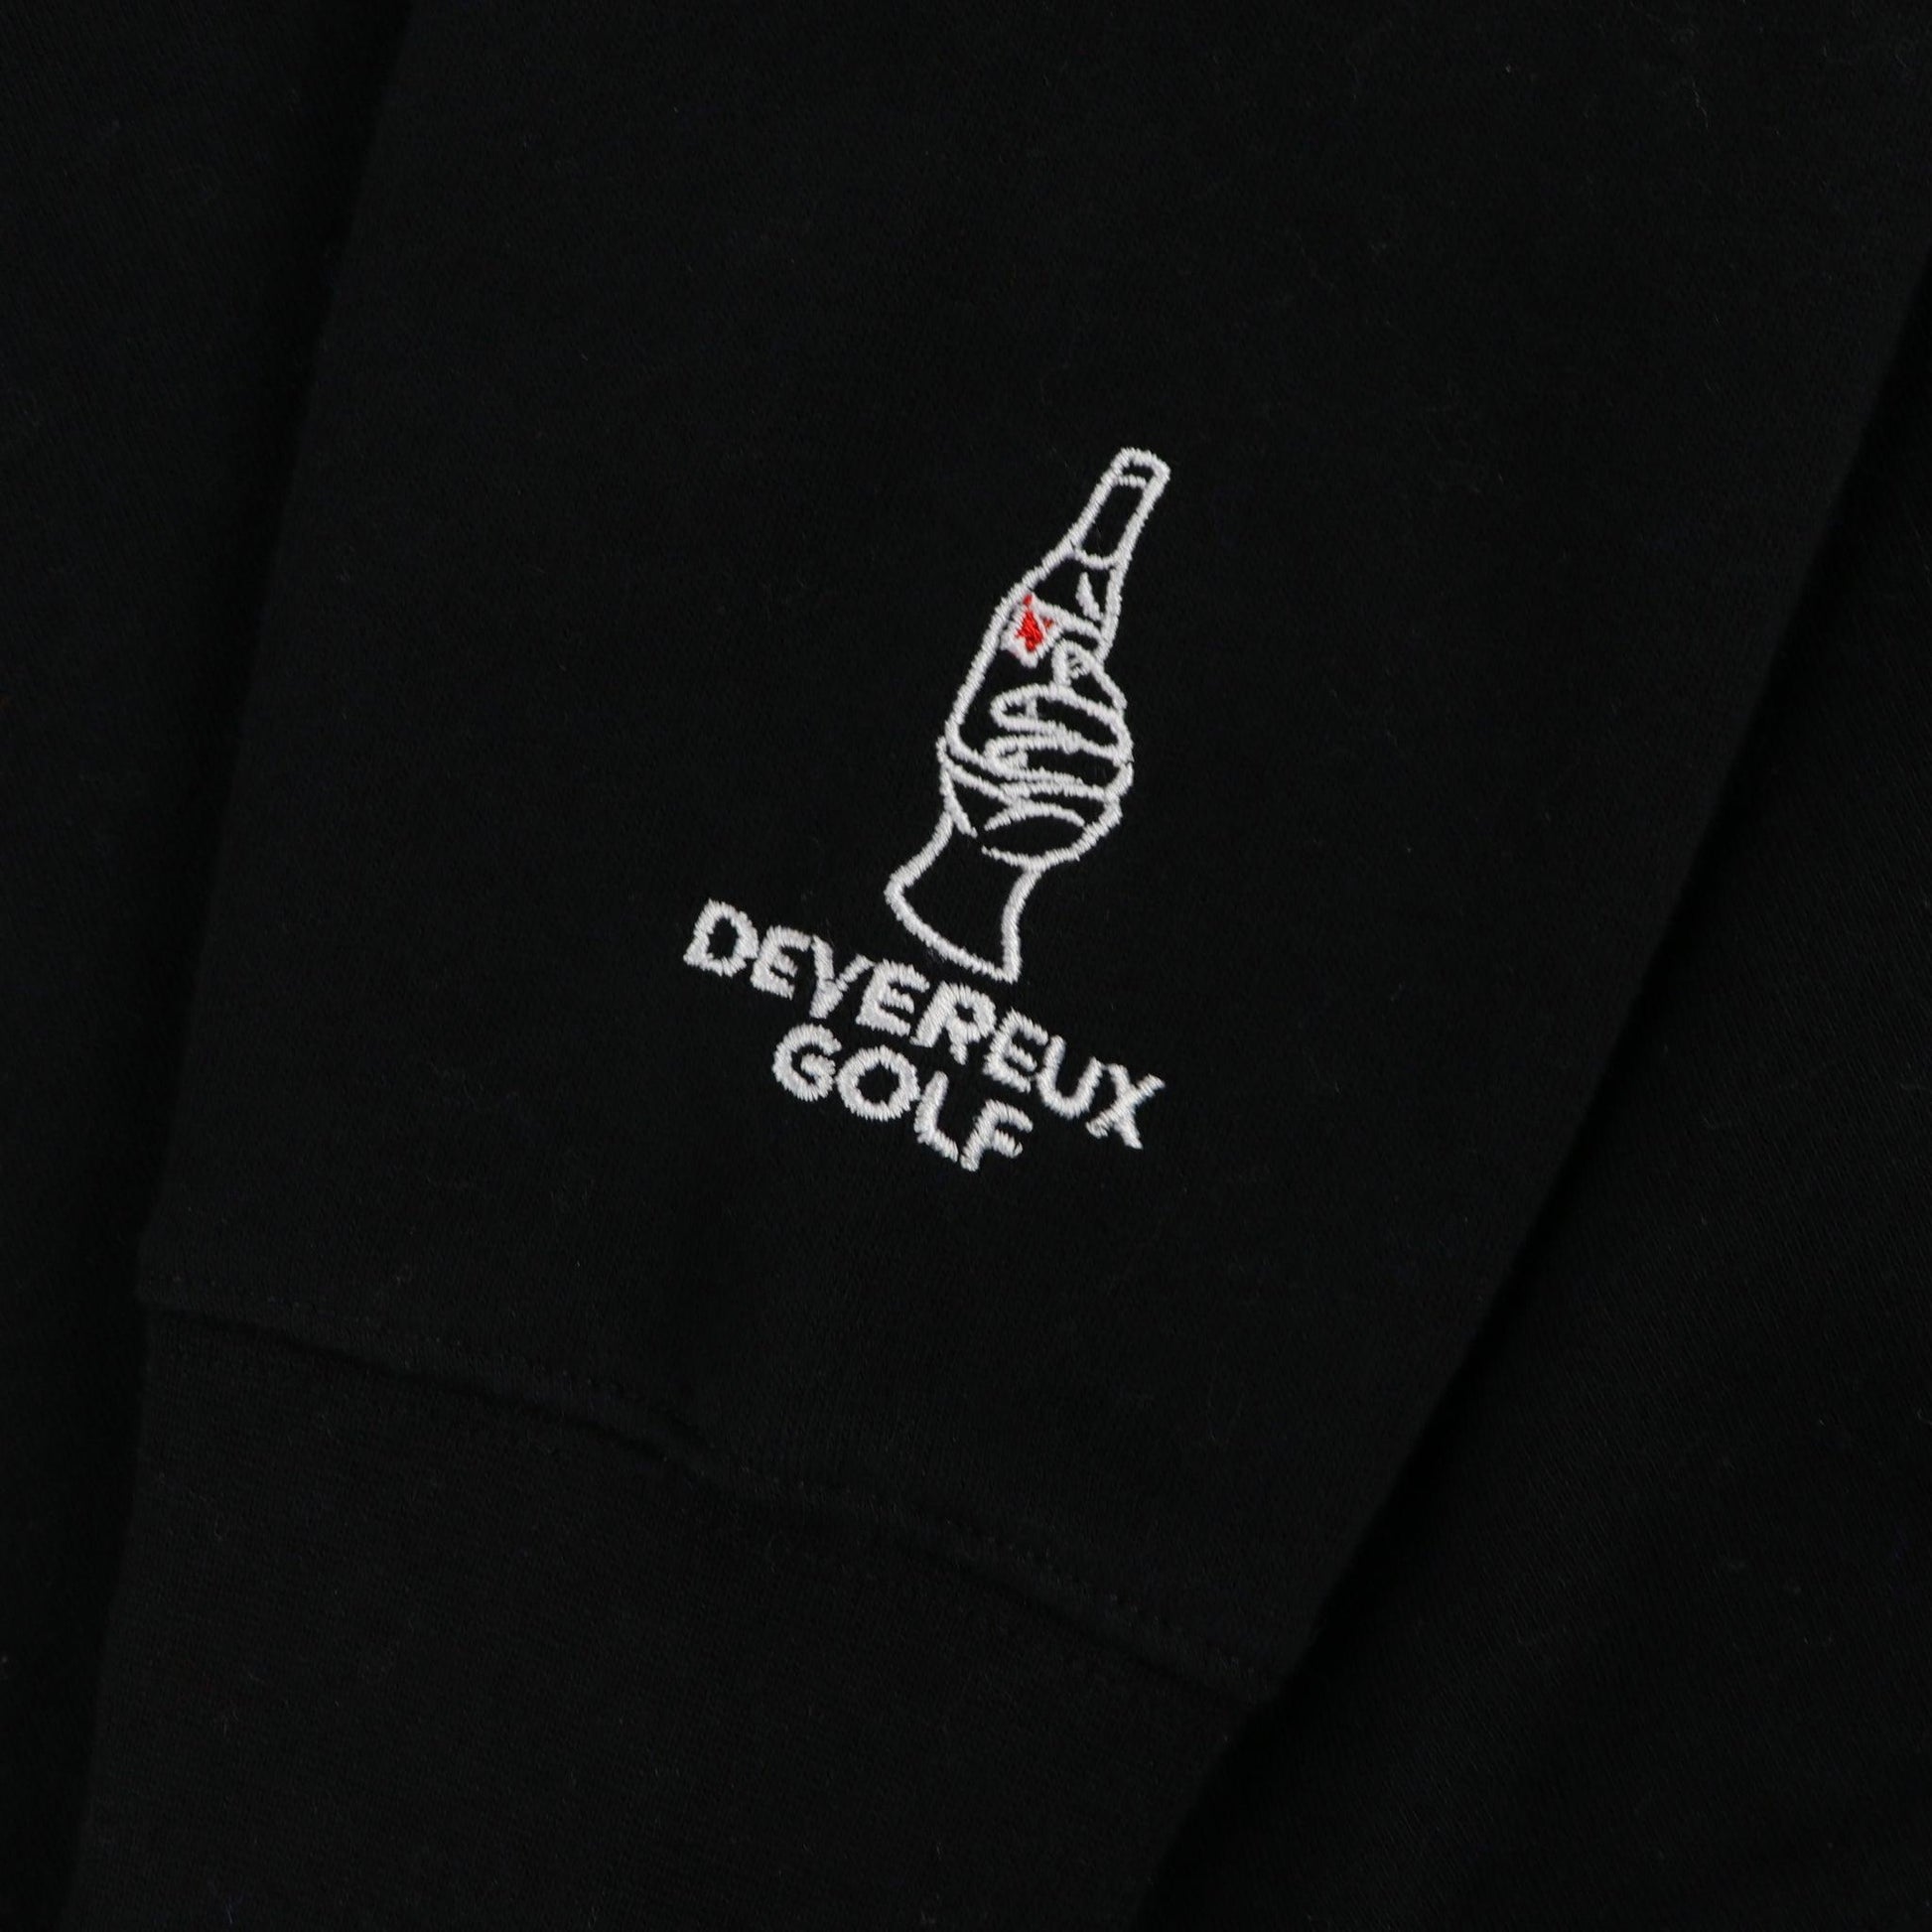 Embroidered Devereaux golf with hand holding bottle of ULTRA. this is featured on lower sleeve by cuff.